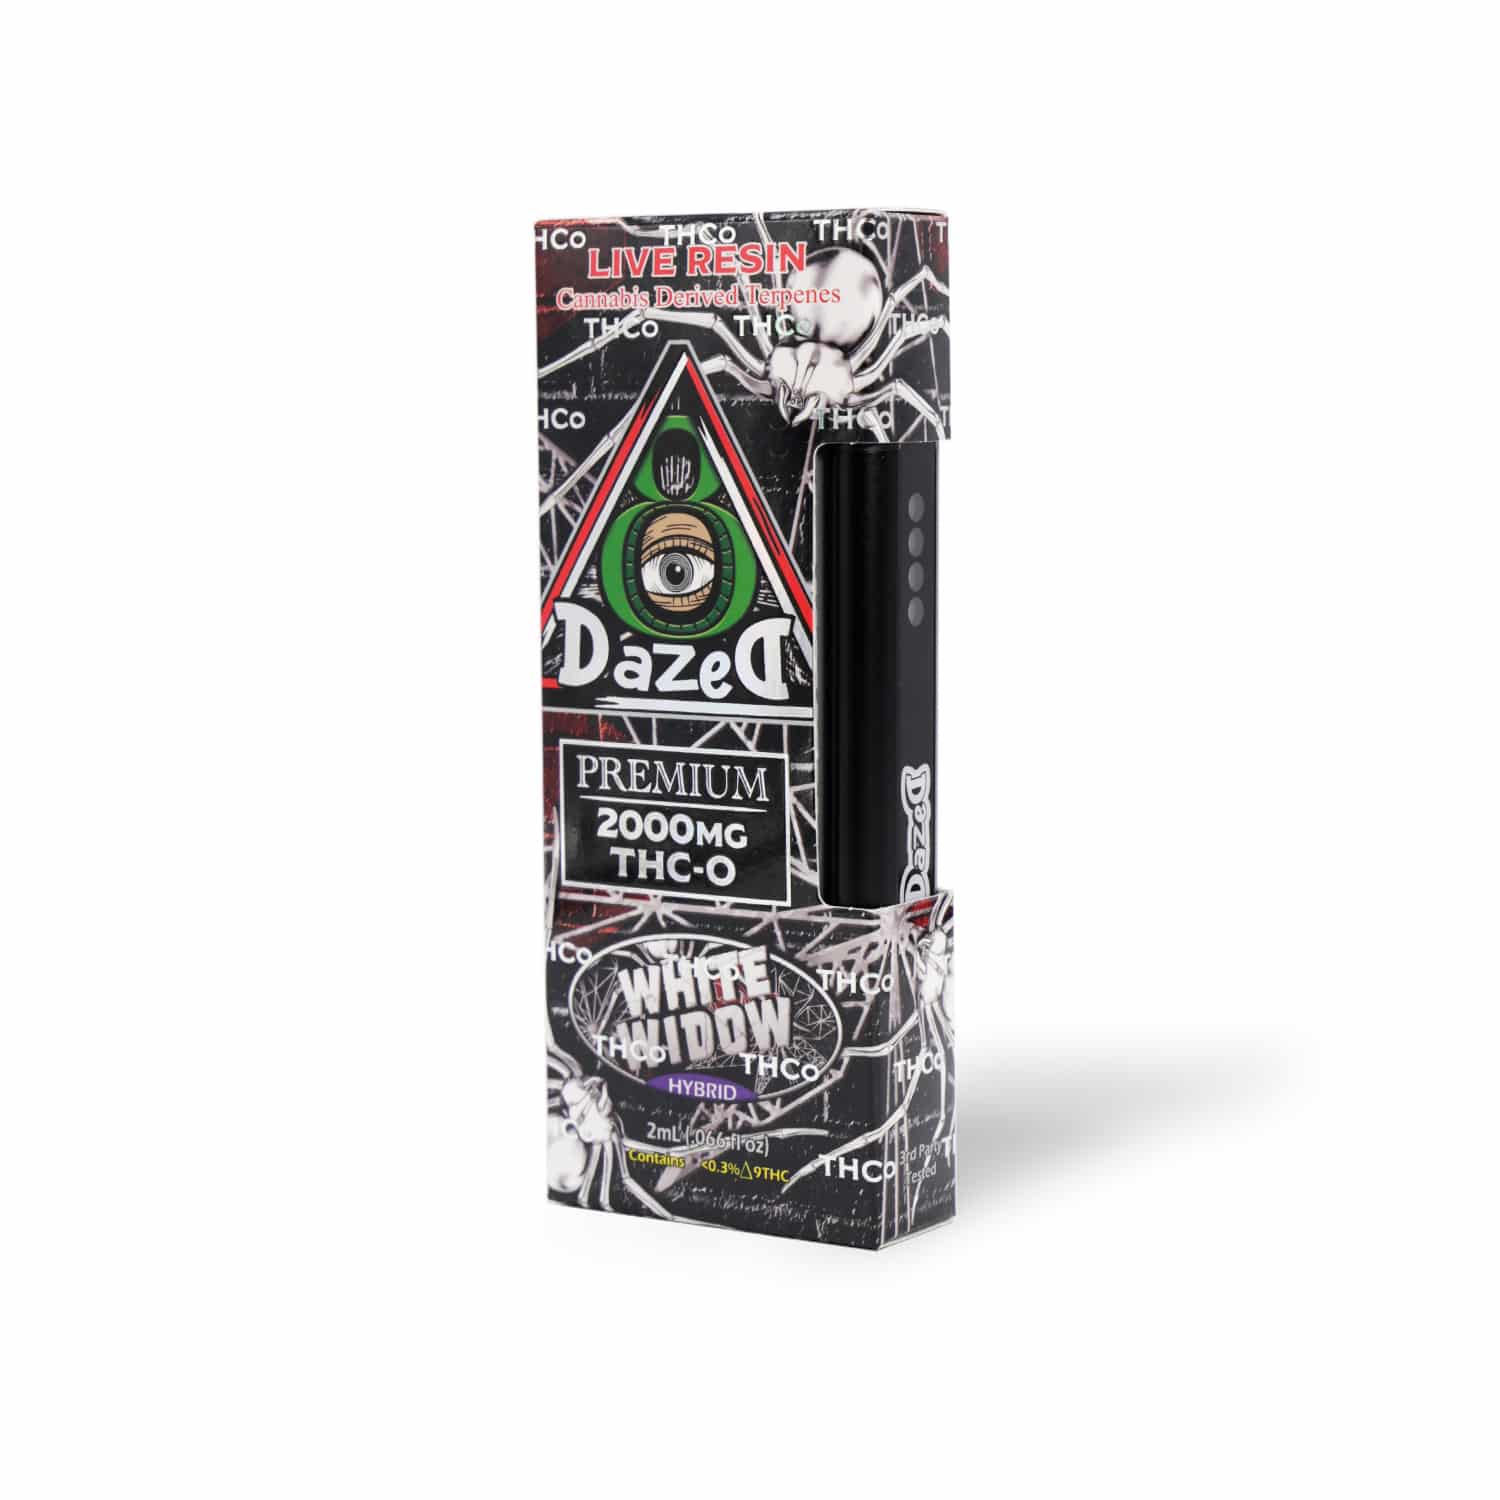 DazeD8 White Widow Live Resin THC-O Disposable (2g) Best Price